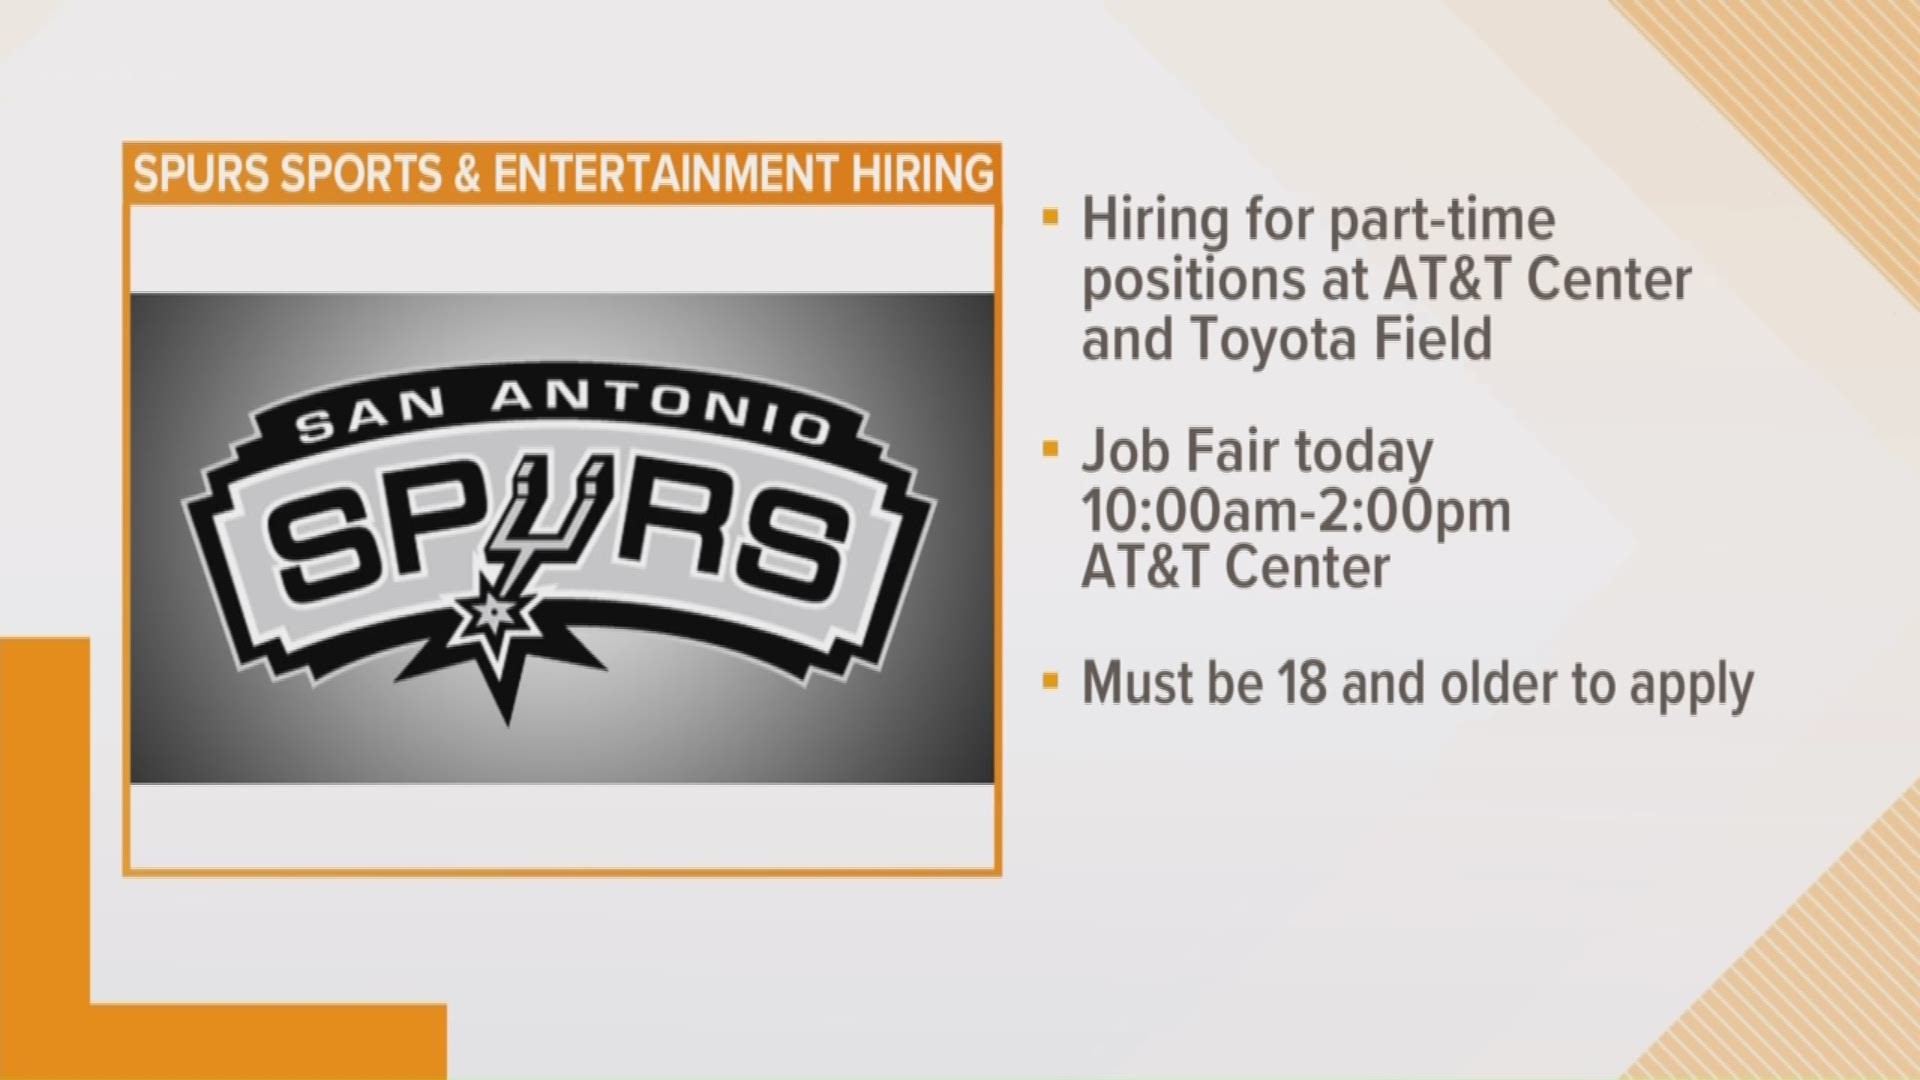 Spurs Sports and Entertainment is hosting a job fair at 10 am Tuesday.